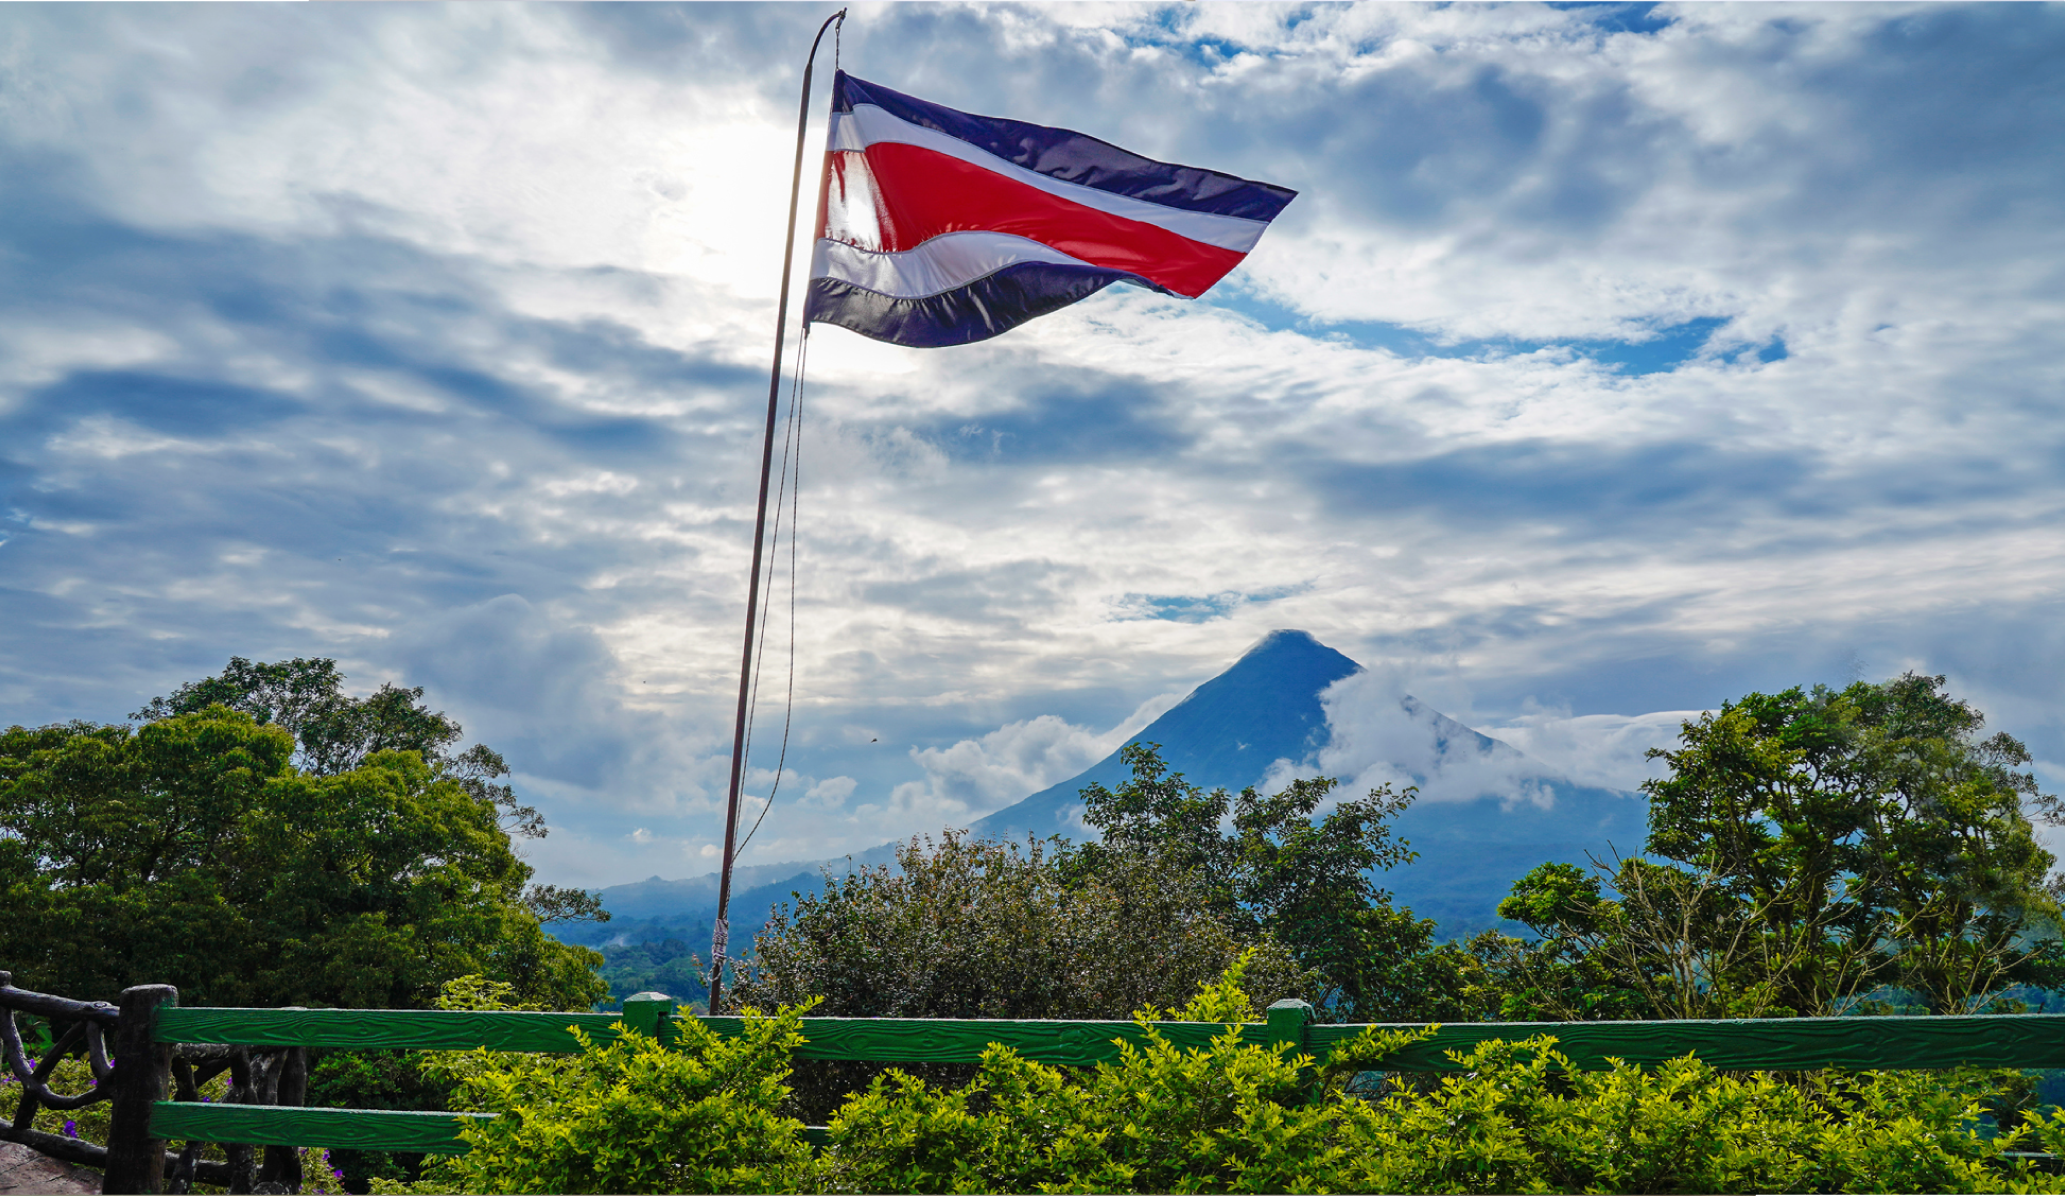 View of Costa Rica's flag waving surrounded by trees and plants, with the Arenal volcano in the background